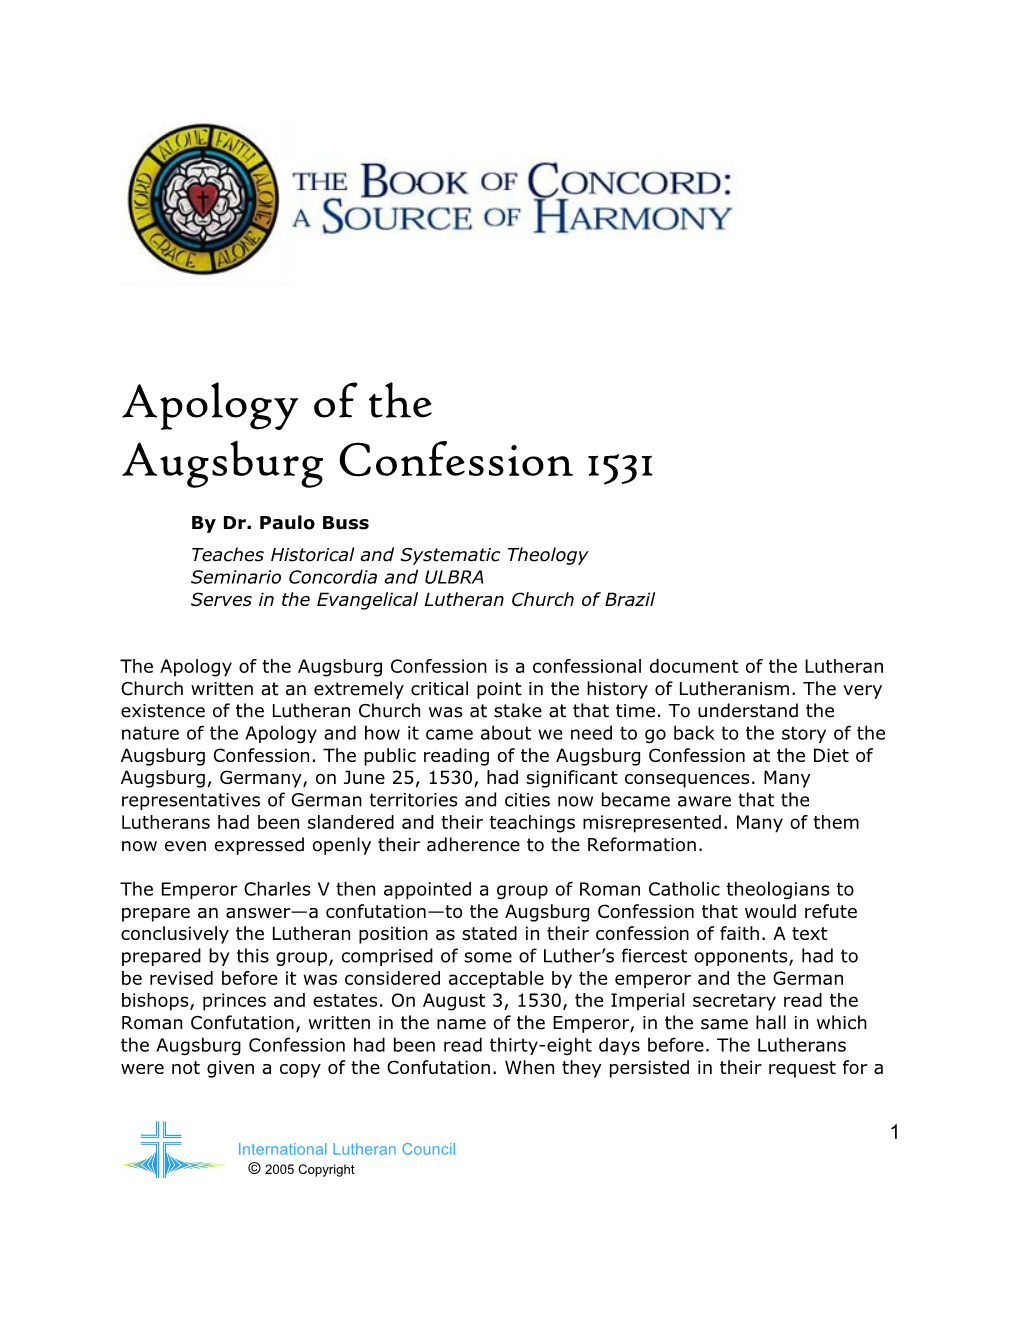 Apology of the Augsburg Confession 1531